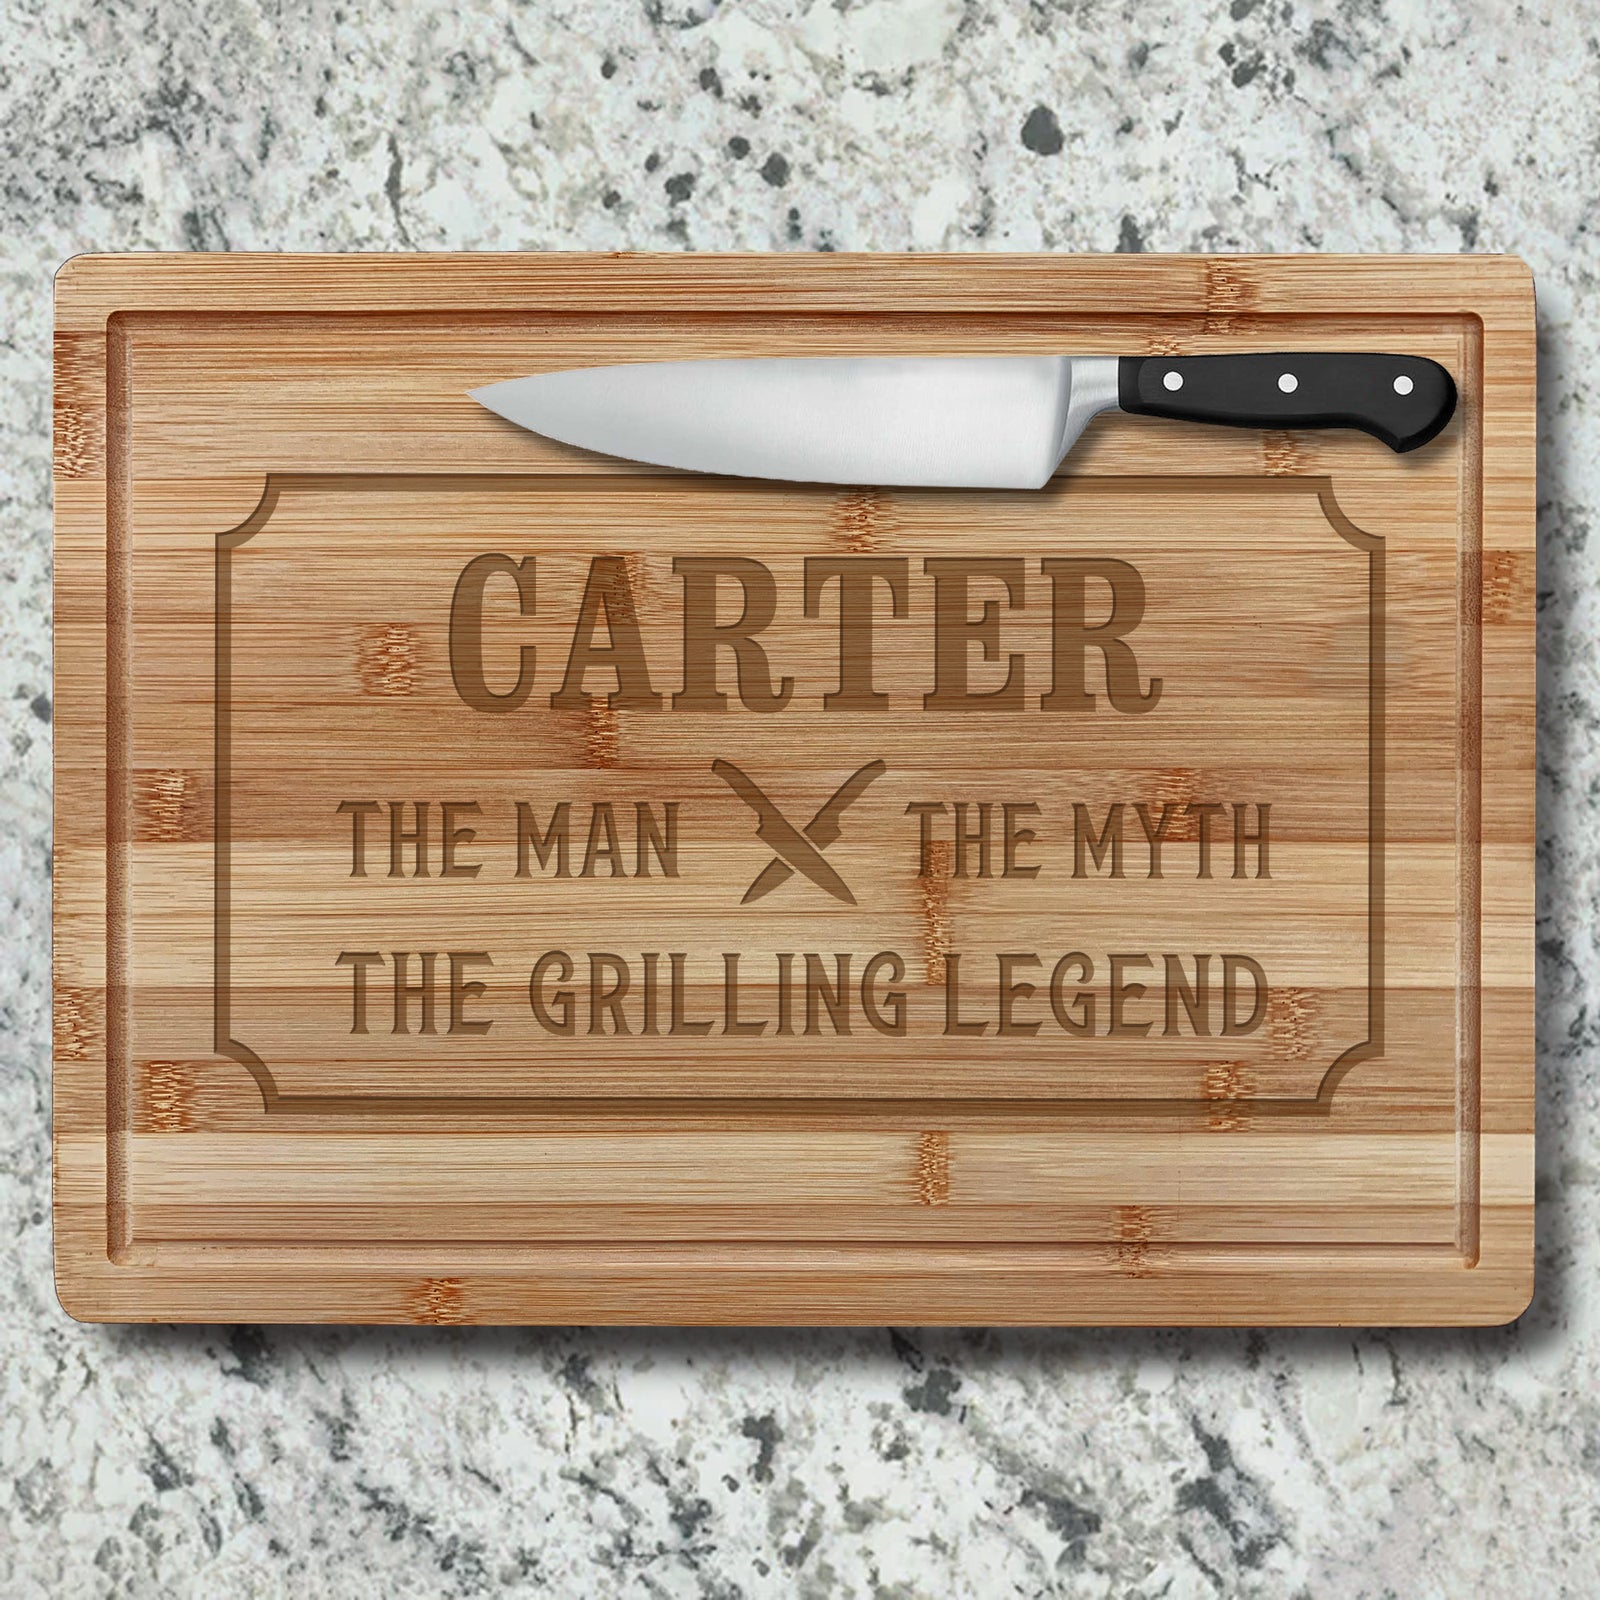 Personalized 'King of the Grill' Wooden Bbq Cutting Board - Grilling Gifts  for Men - Personalized Cooking Gifts for Men - Bbq Gifts for Men